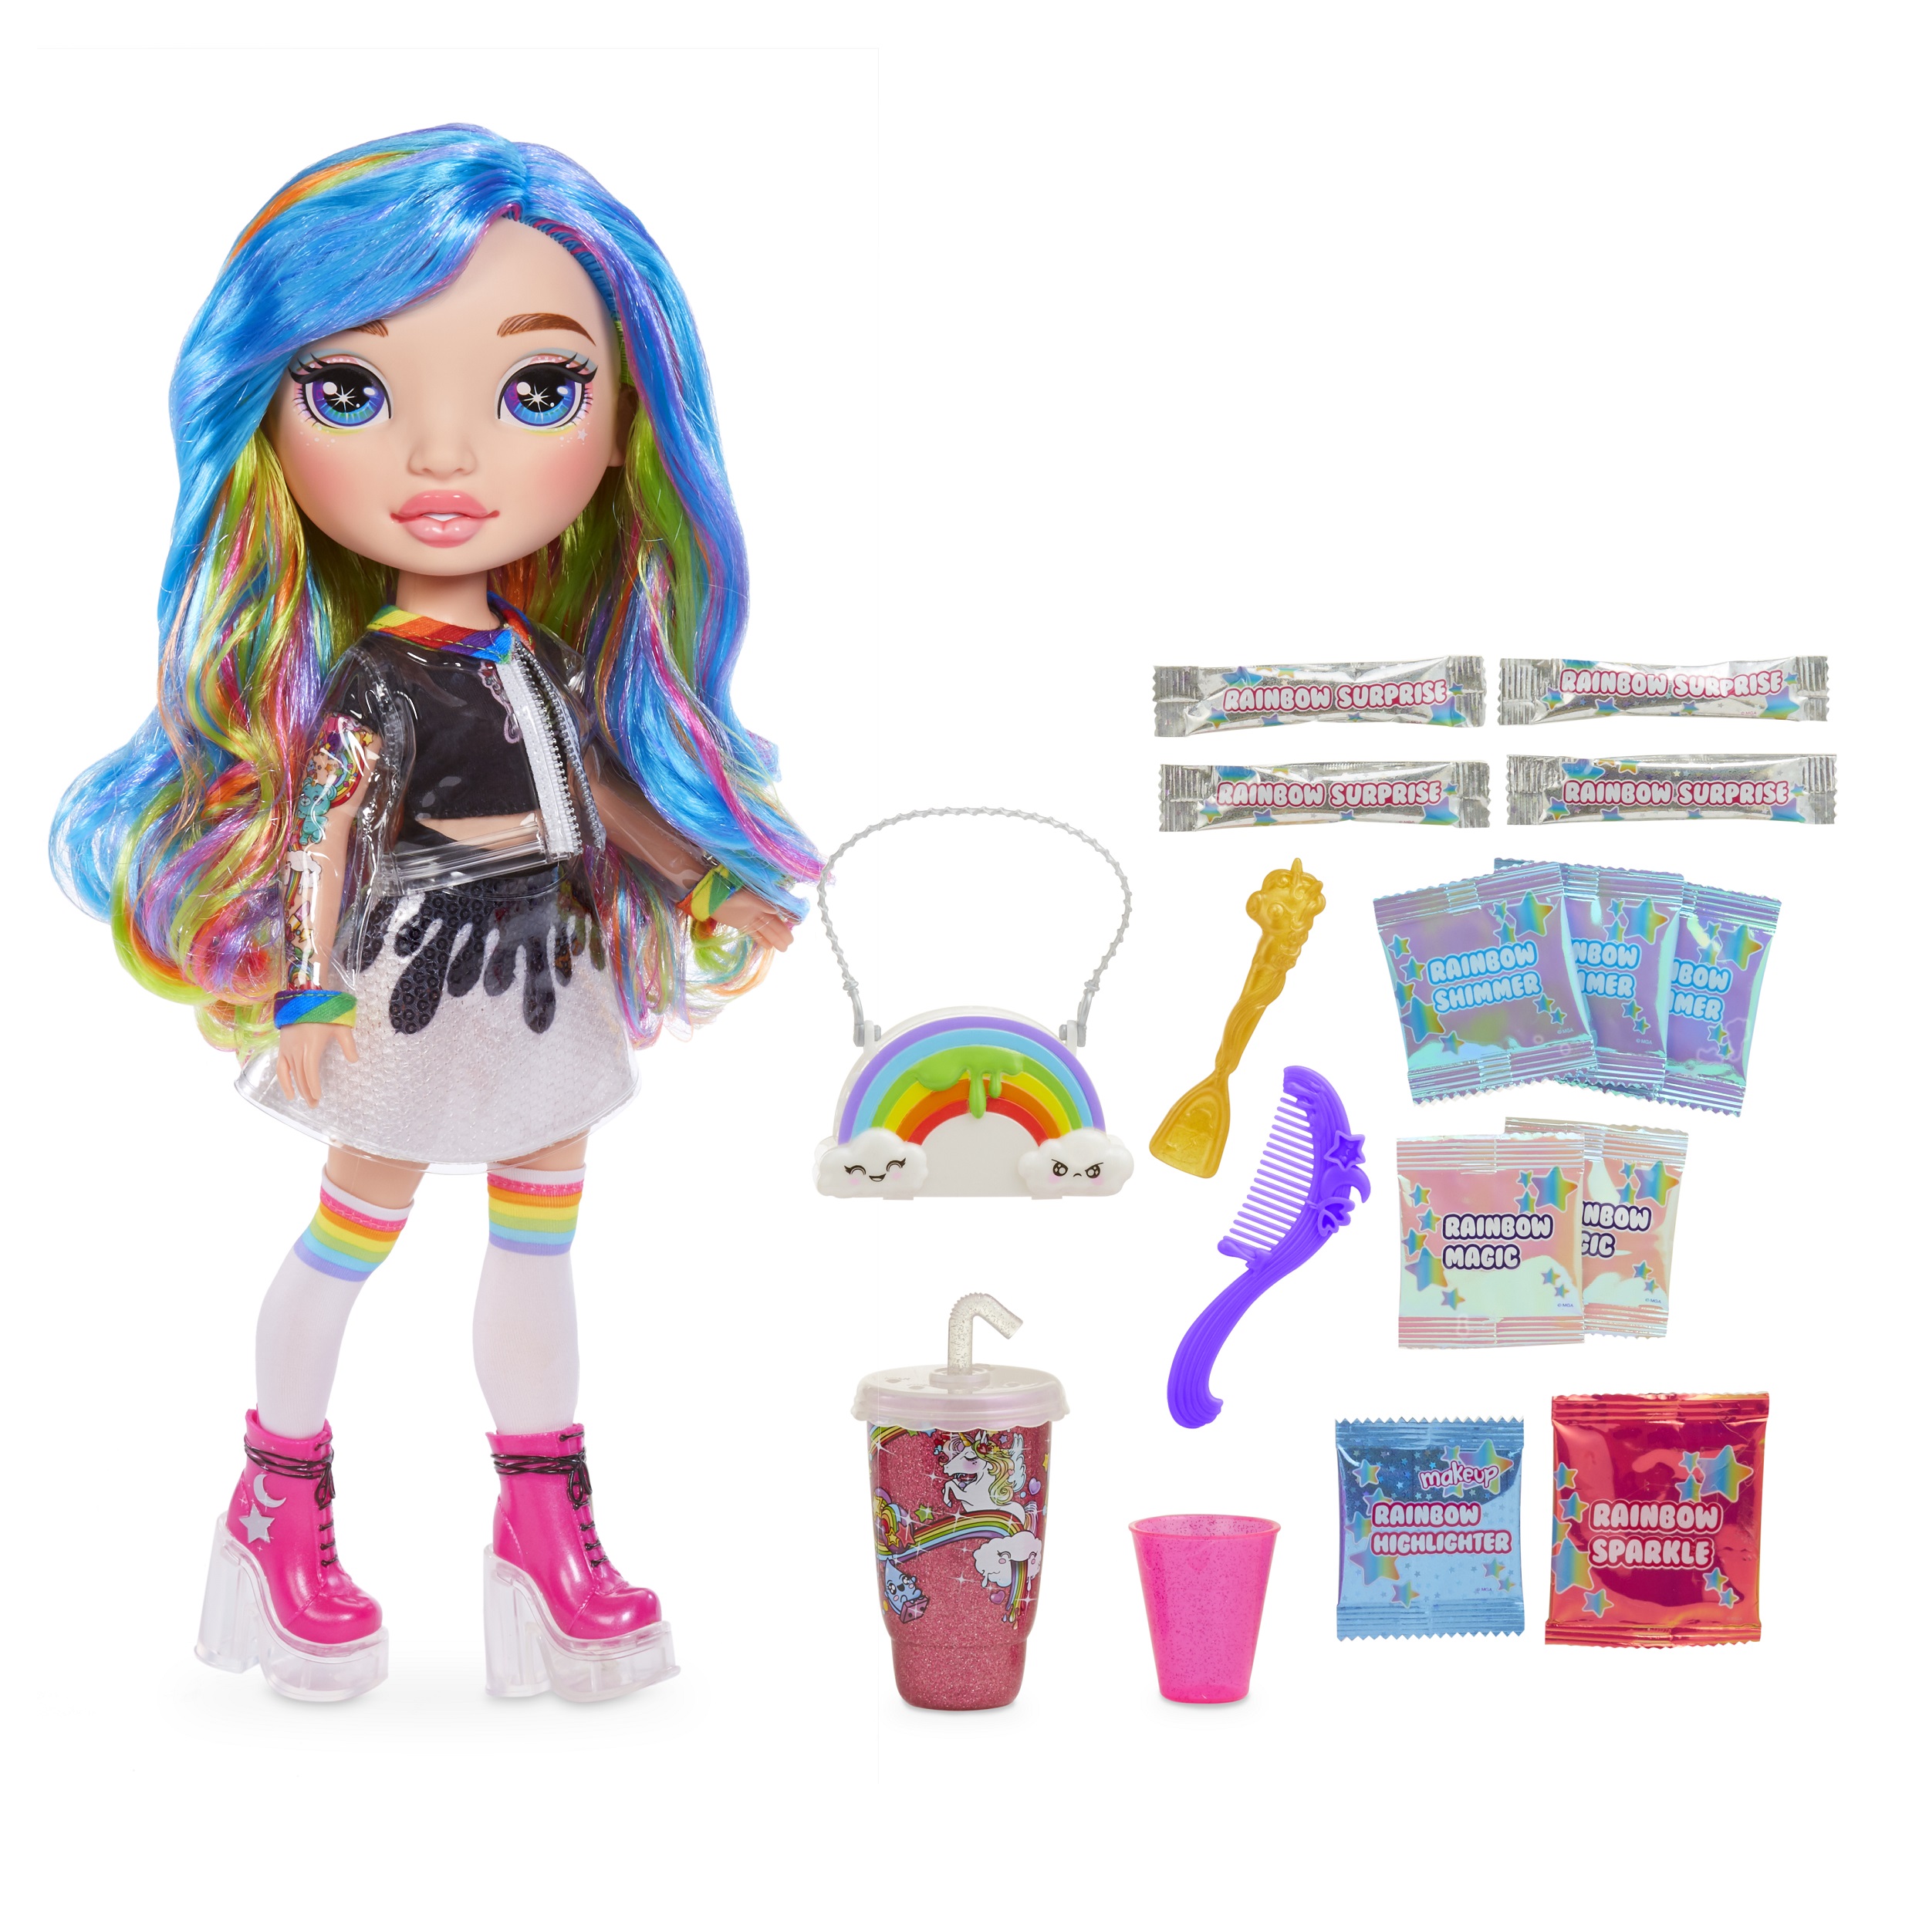 Rainbow Surprise by Poopsie: 14" Doll with 20+ Slime & Fashion Surprises, Rainbow Dream or Pixie Rose - image 5 of 8